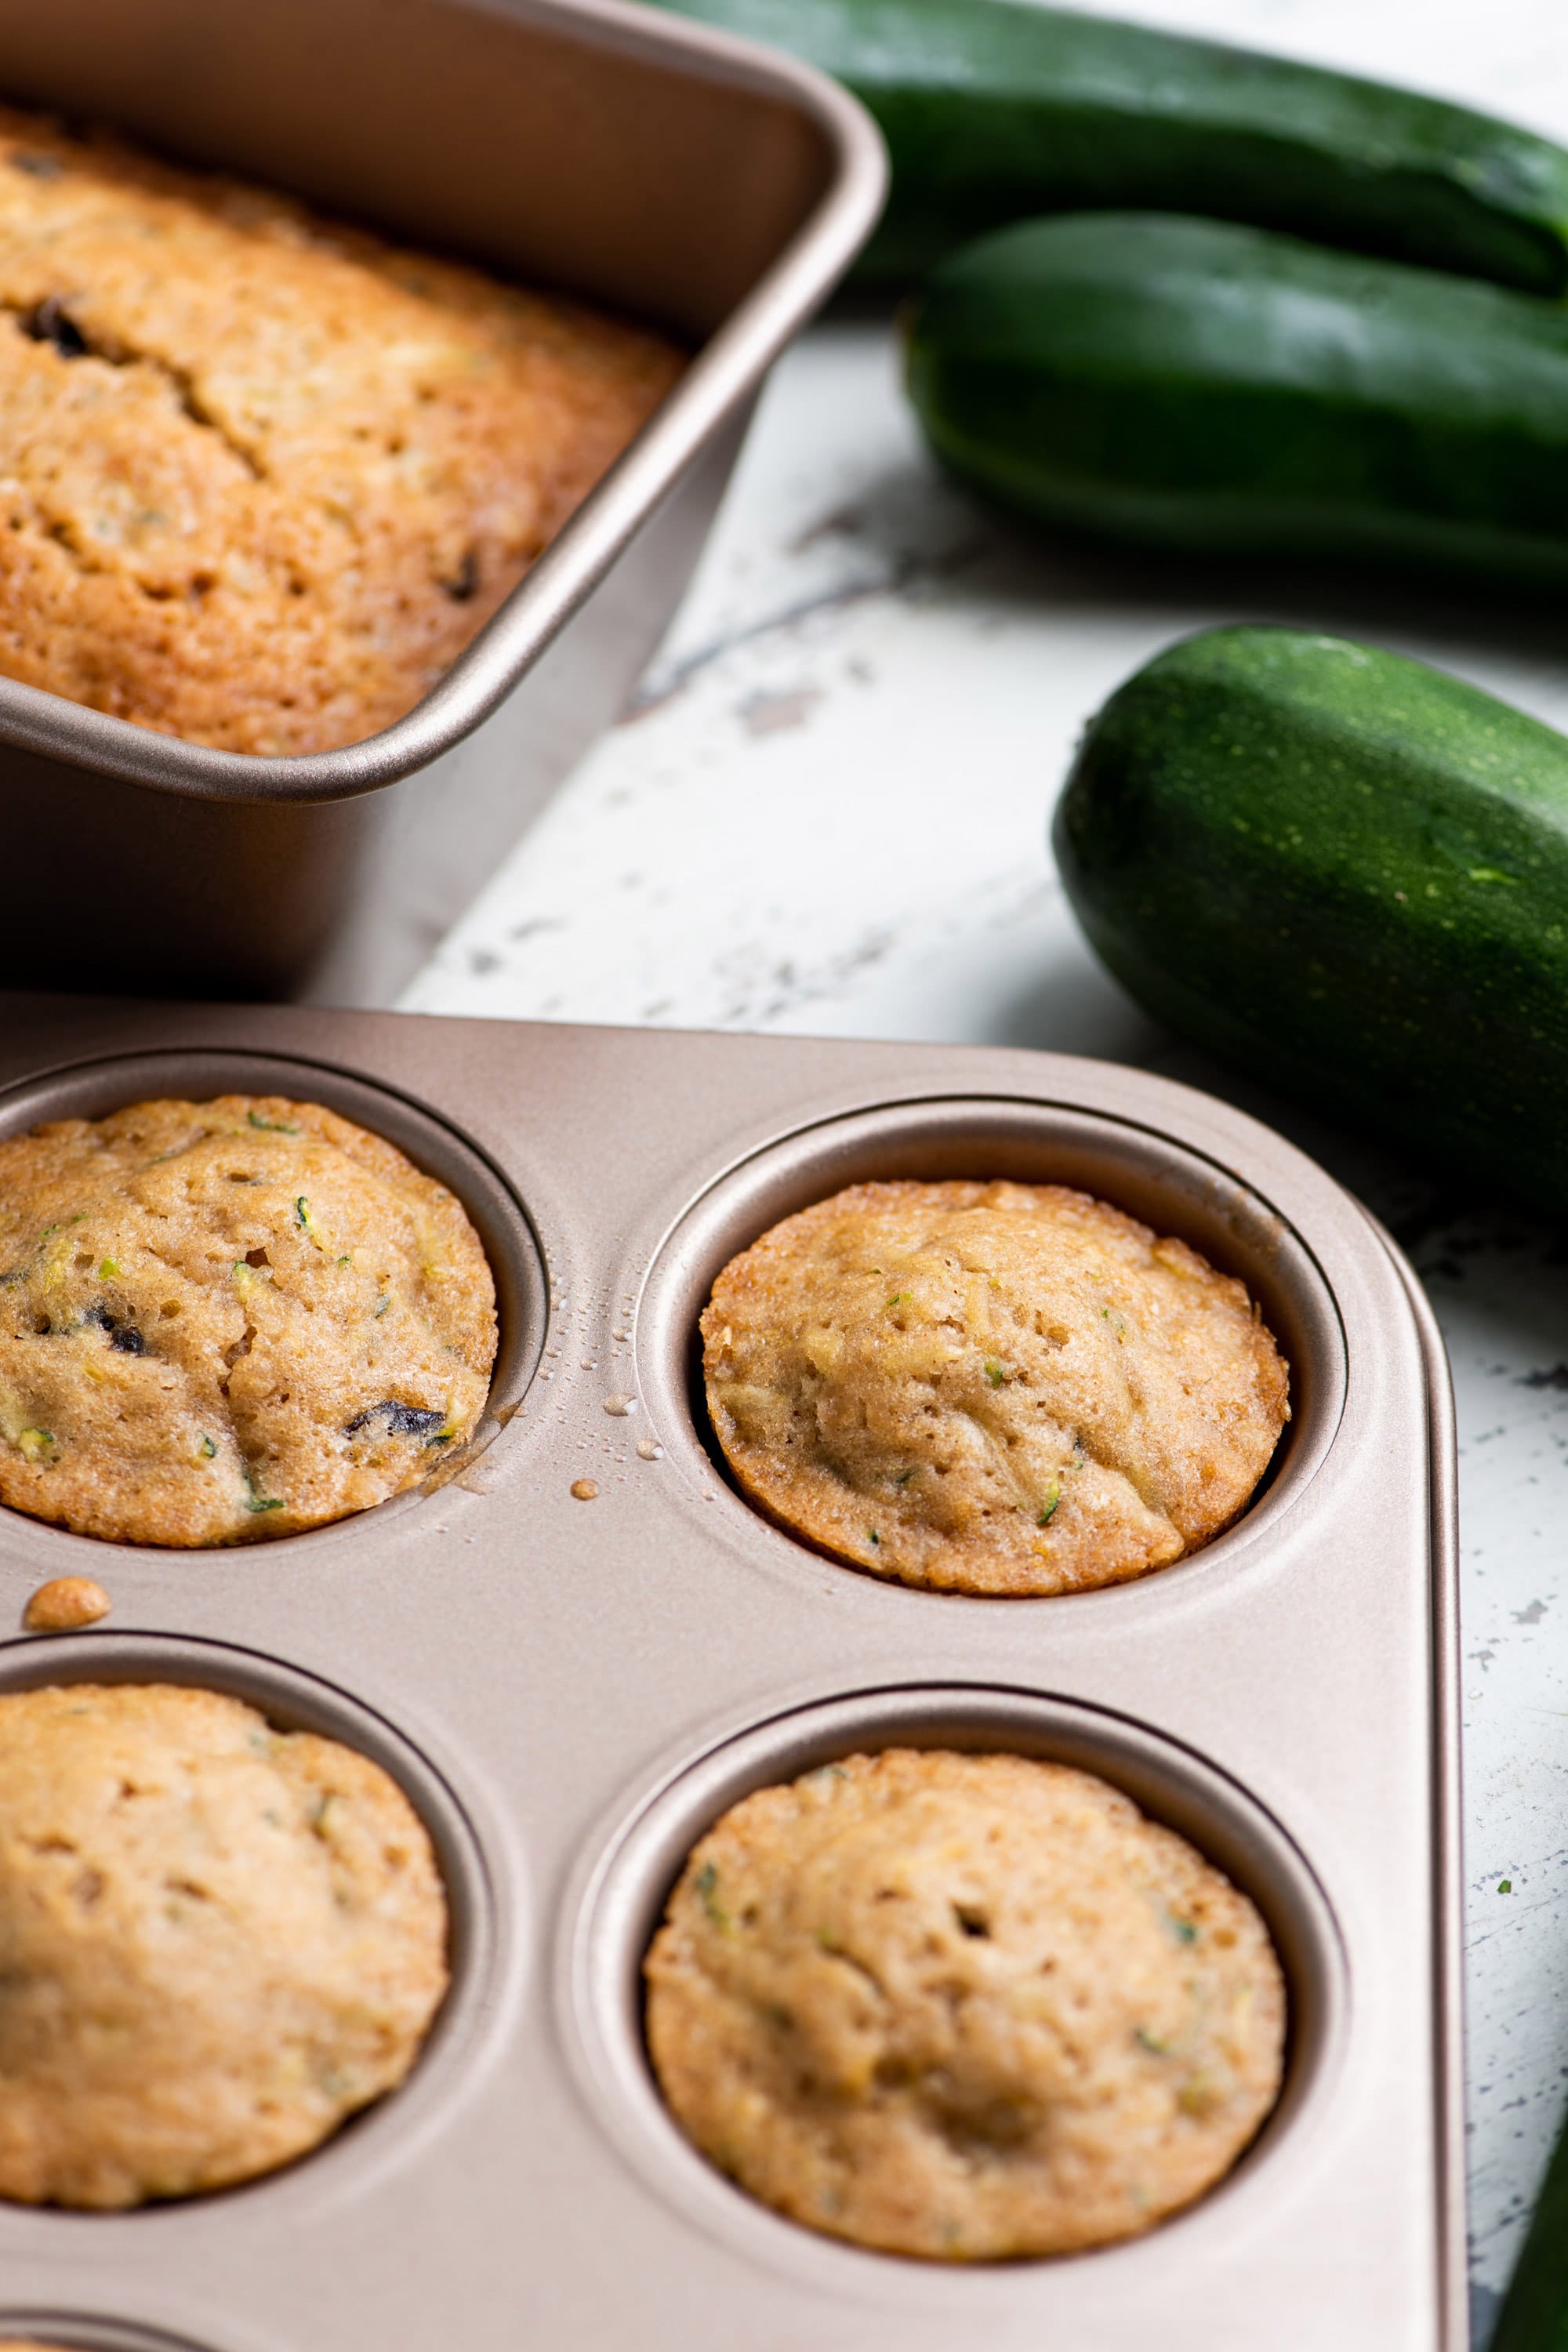 Zucchini Bread and Muffins in baking pans.